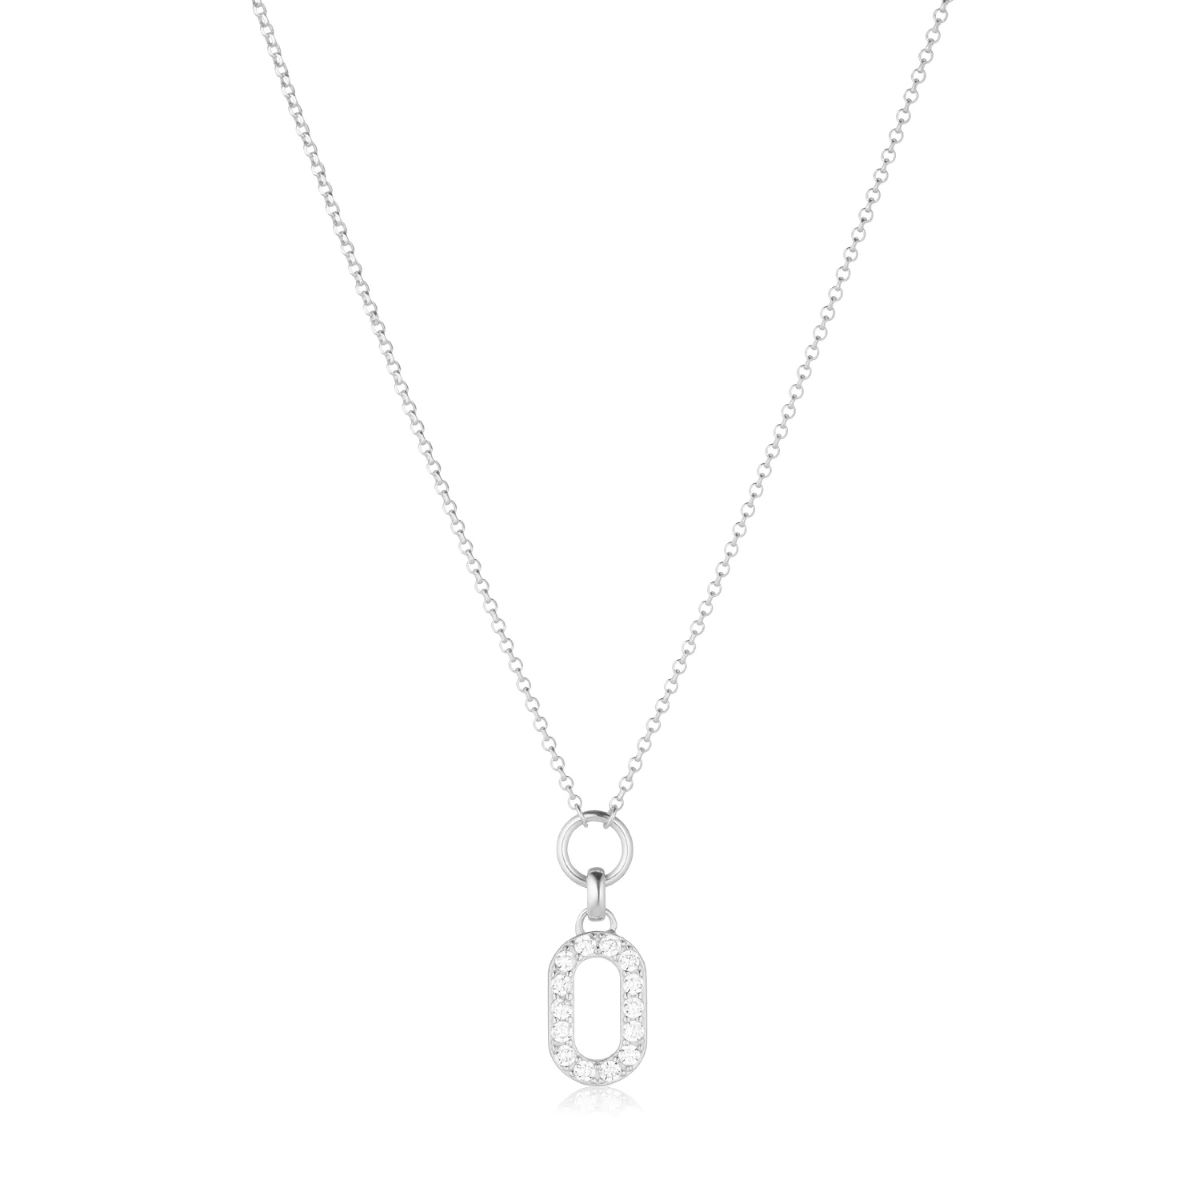 Sif Jakobs Capizzi Piccolo Necklace - with White Zirconia